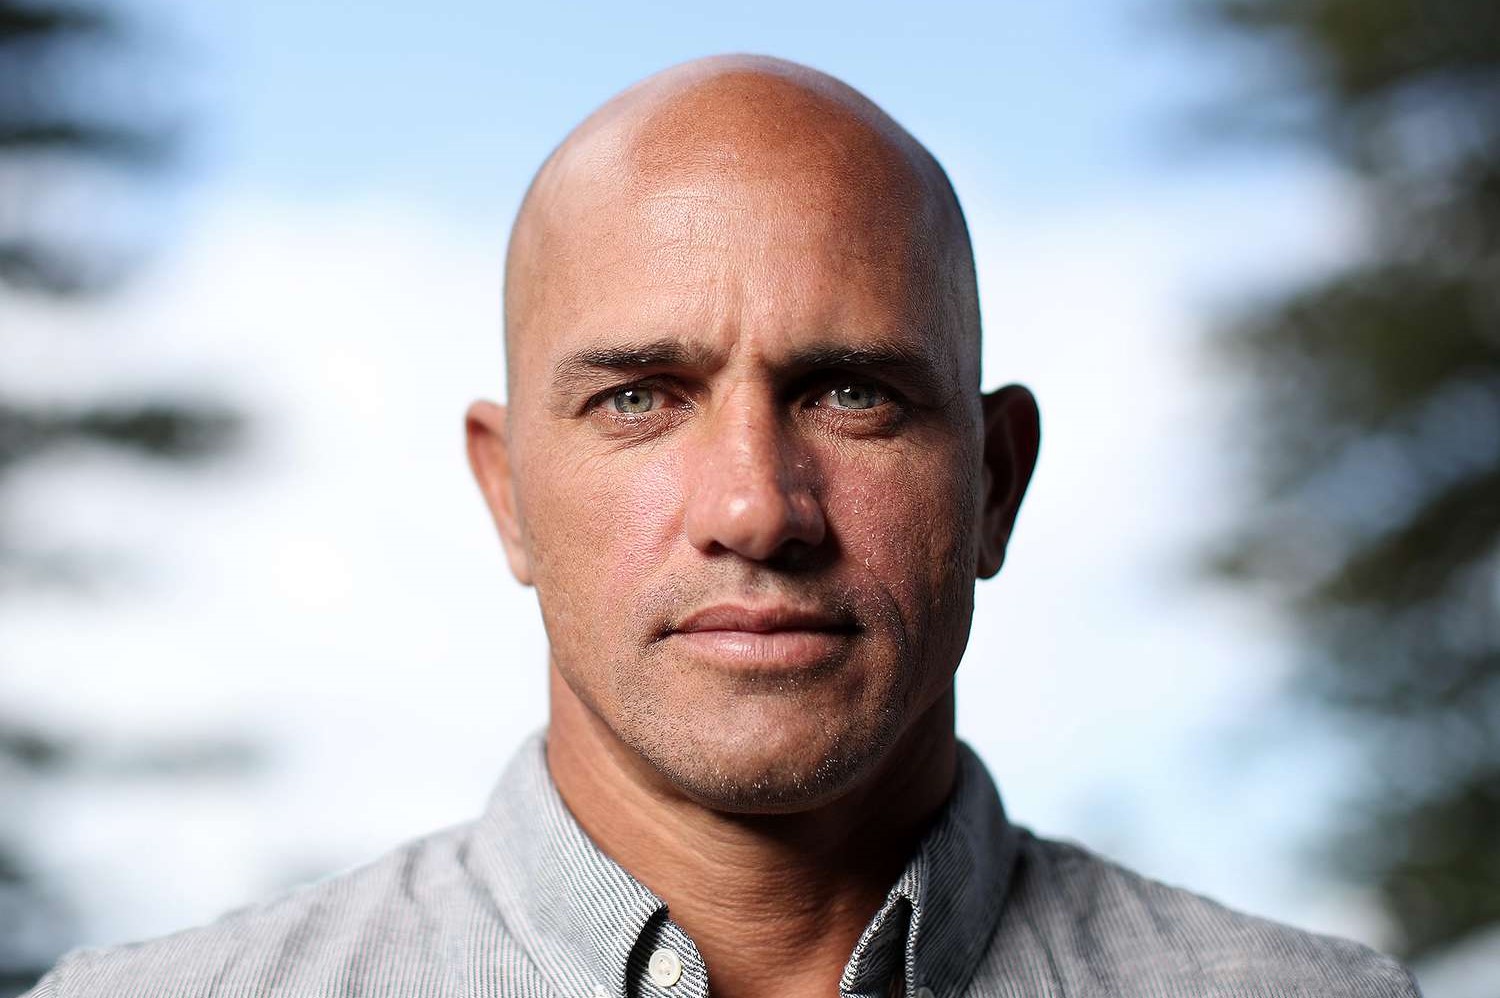 Kelly Slater — Professional Surfer and Environmental Activist